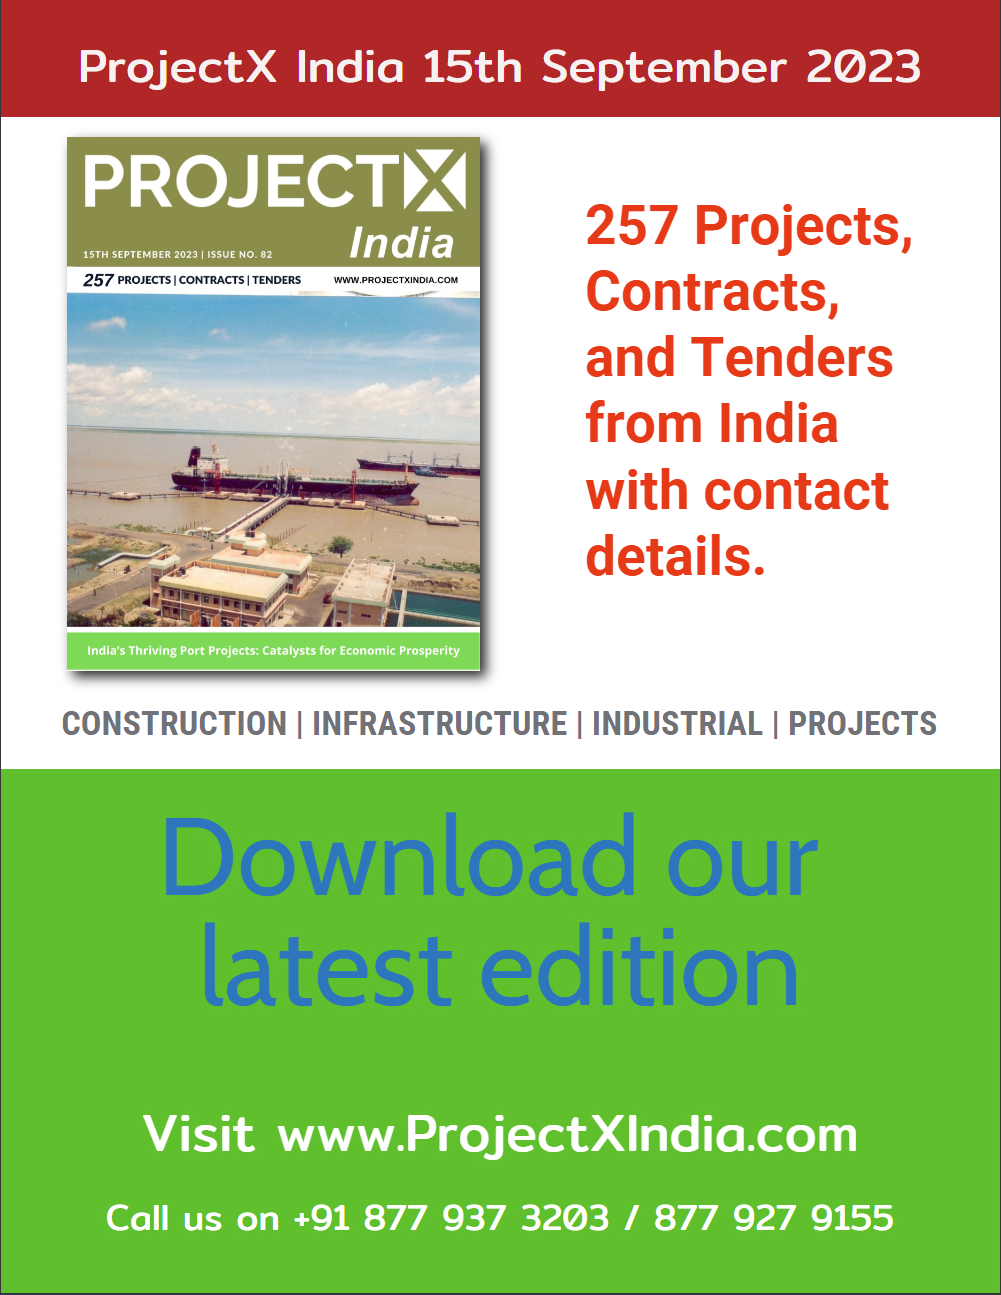 Access 257 projects with contacts in our 15th September 2023 edition of ProjectX India